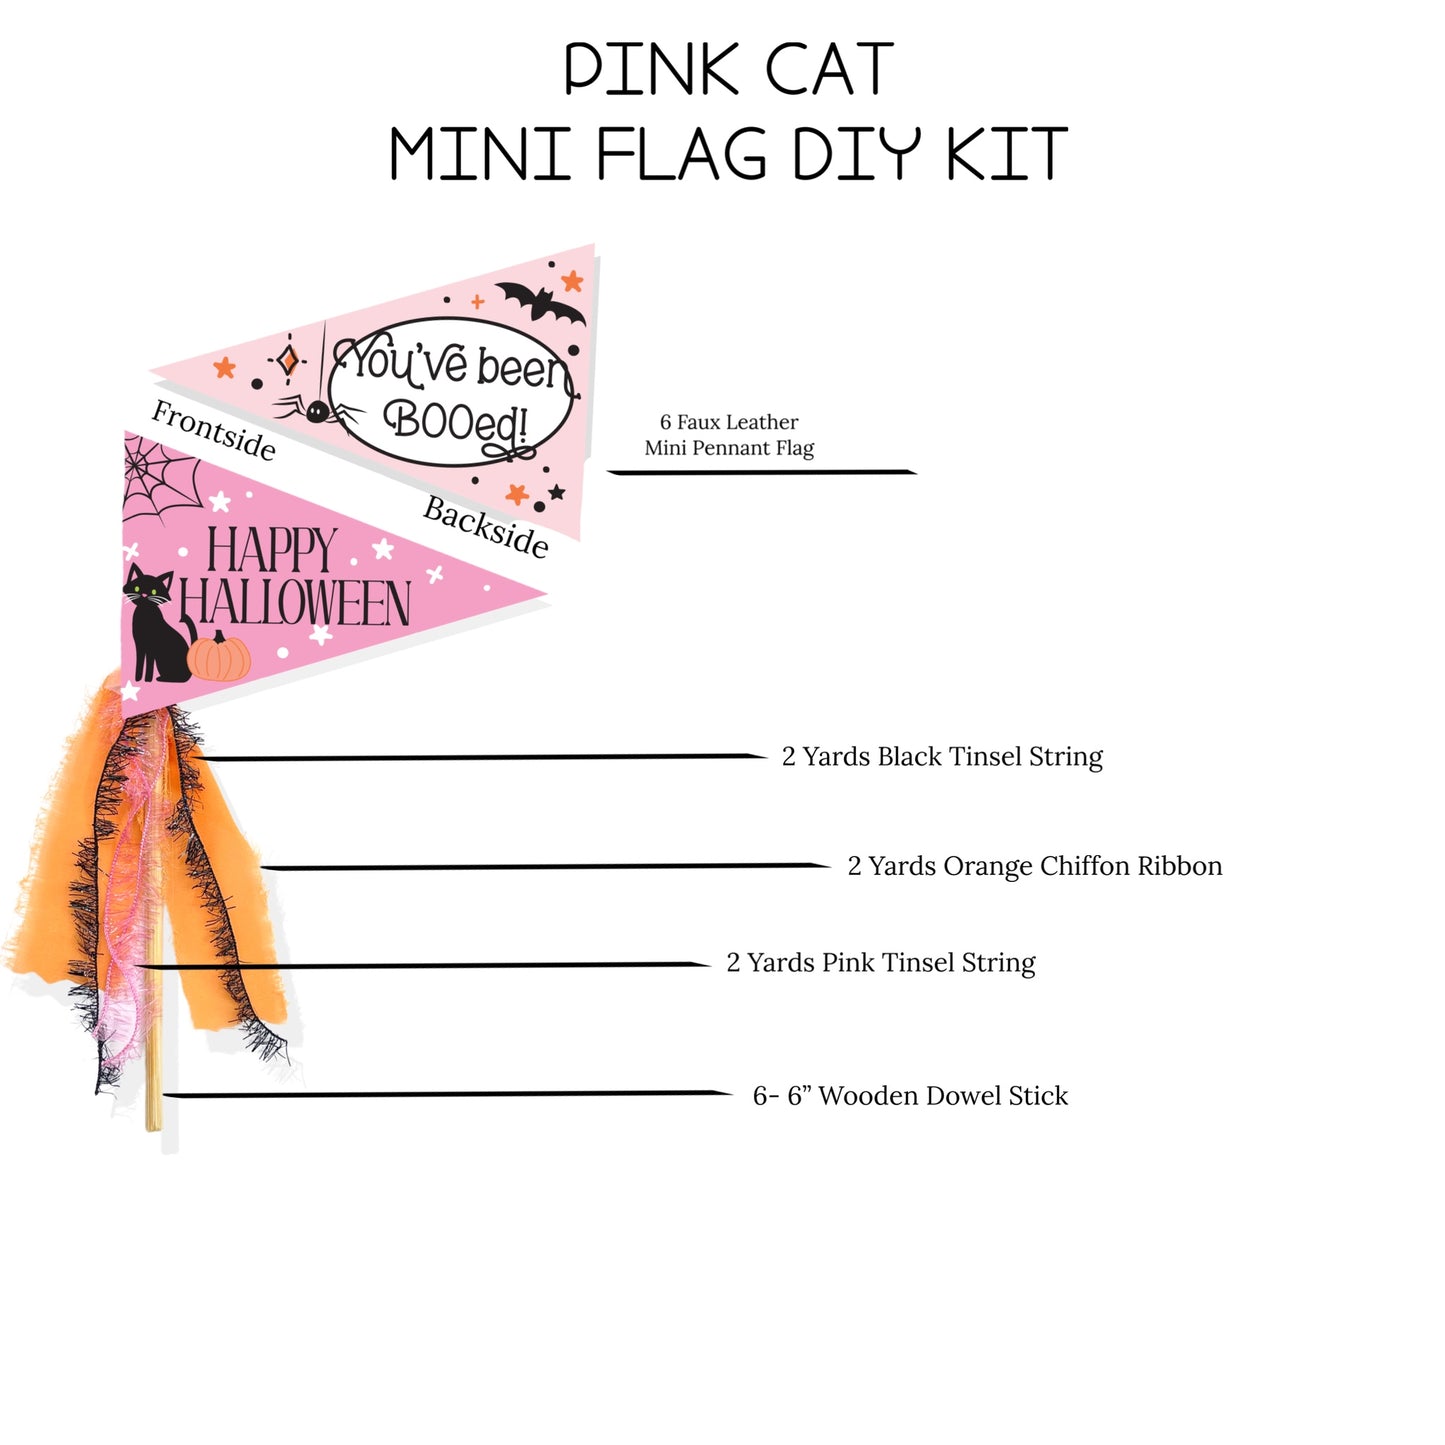 Mini Pretty Pink Cat Booed Faux Leather Pennant Flags - DIY